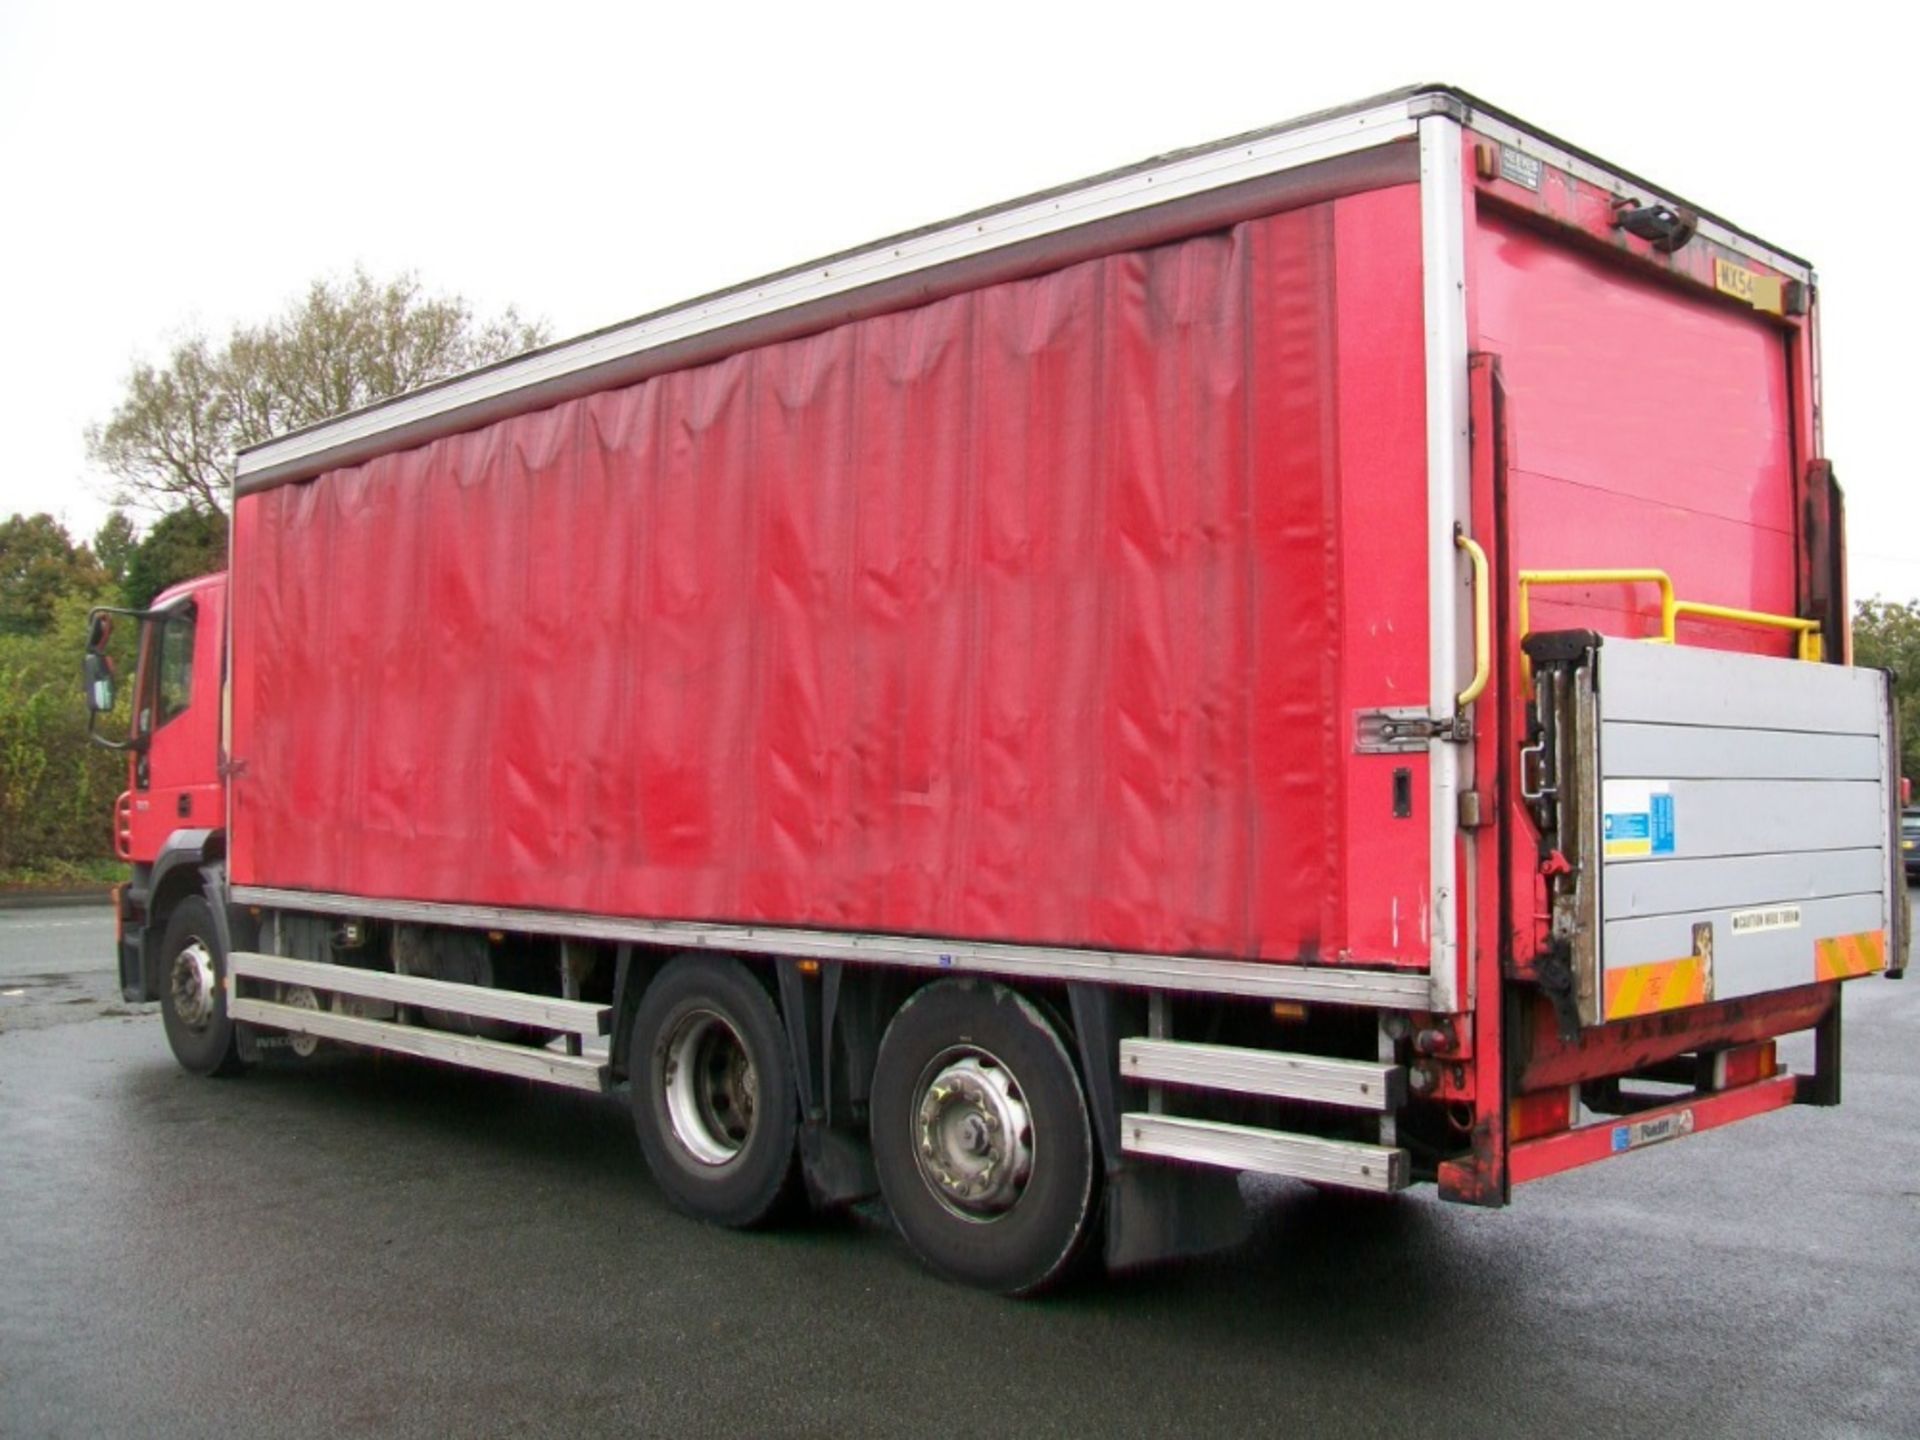 Iveco Stralis 6x2 Day Cab 25ft Curtainsider c/w Rear Steer Axle & Ratcliffe Column Tail Lift, Regist